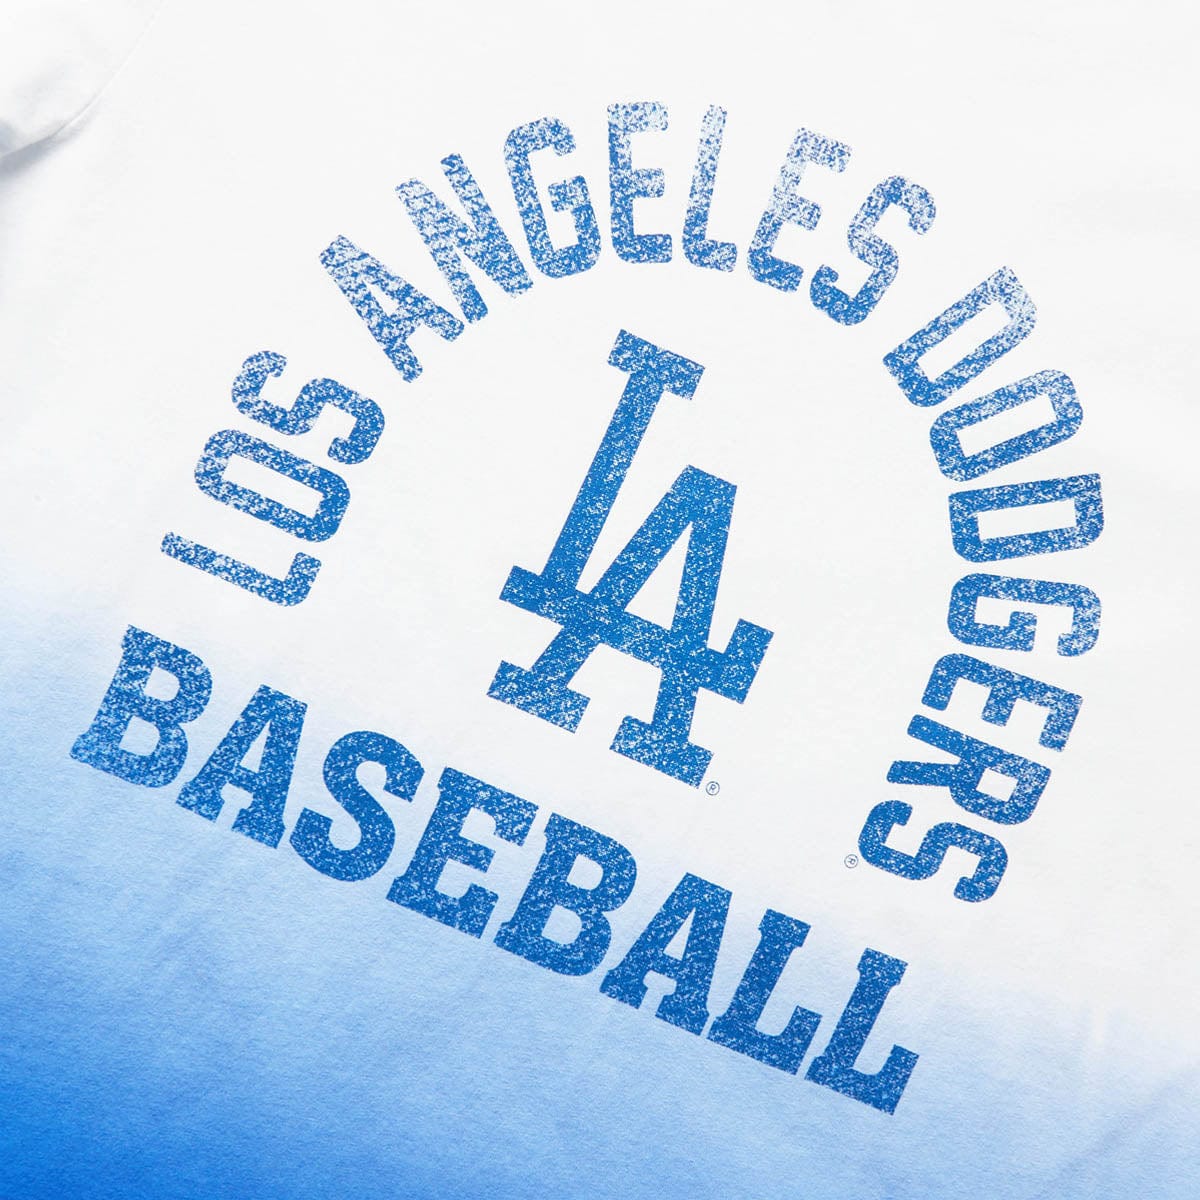 THROWBACK COLLECTION DODGERS T-SHIRT DODGERS